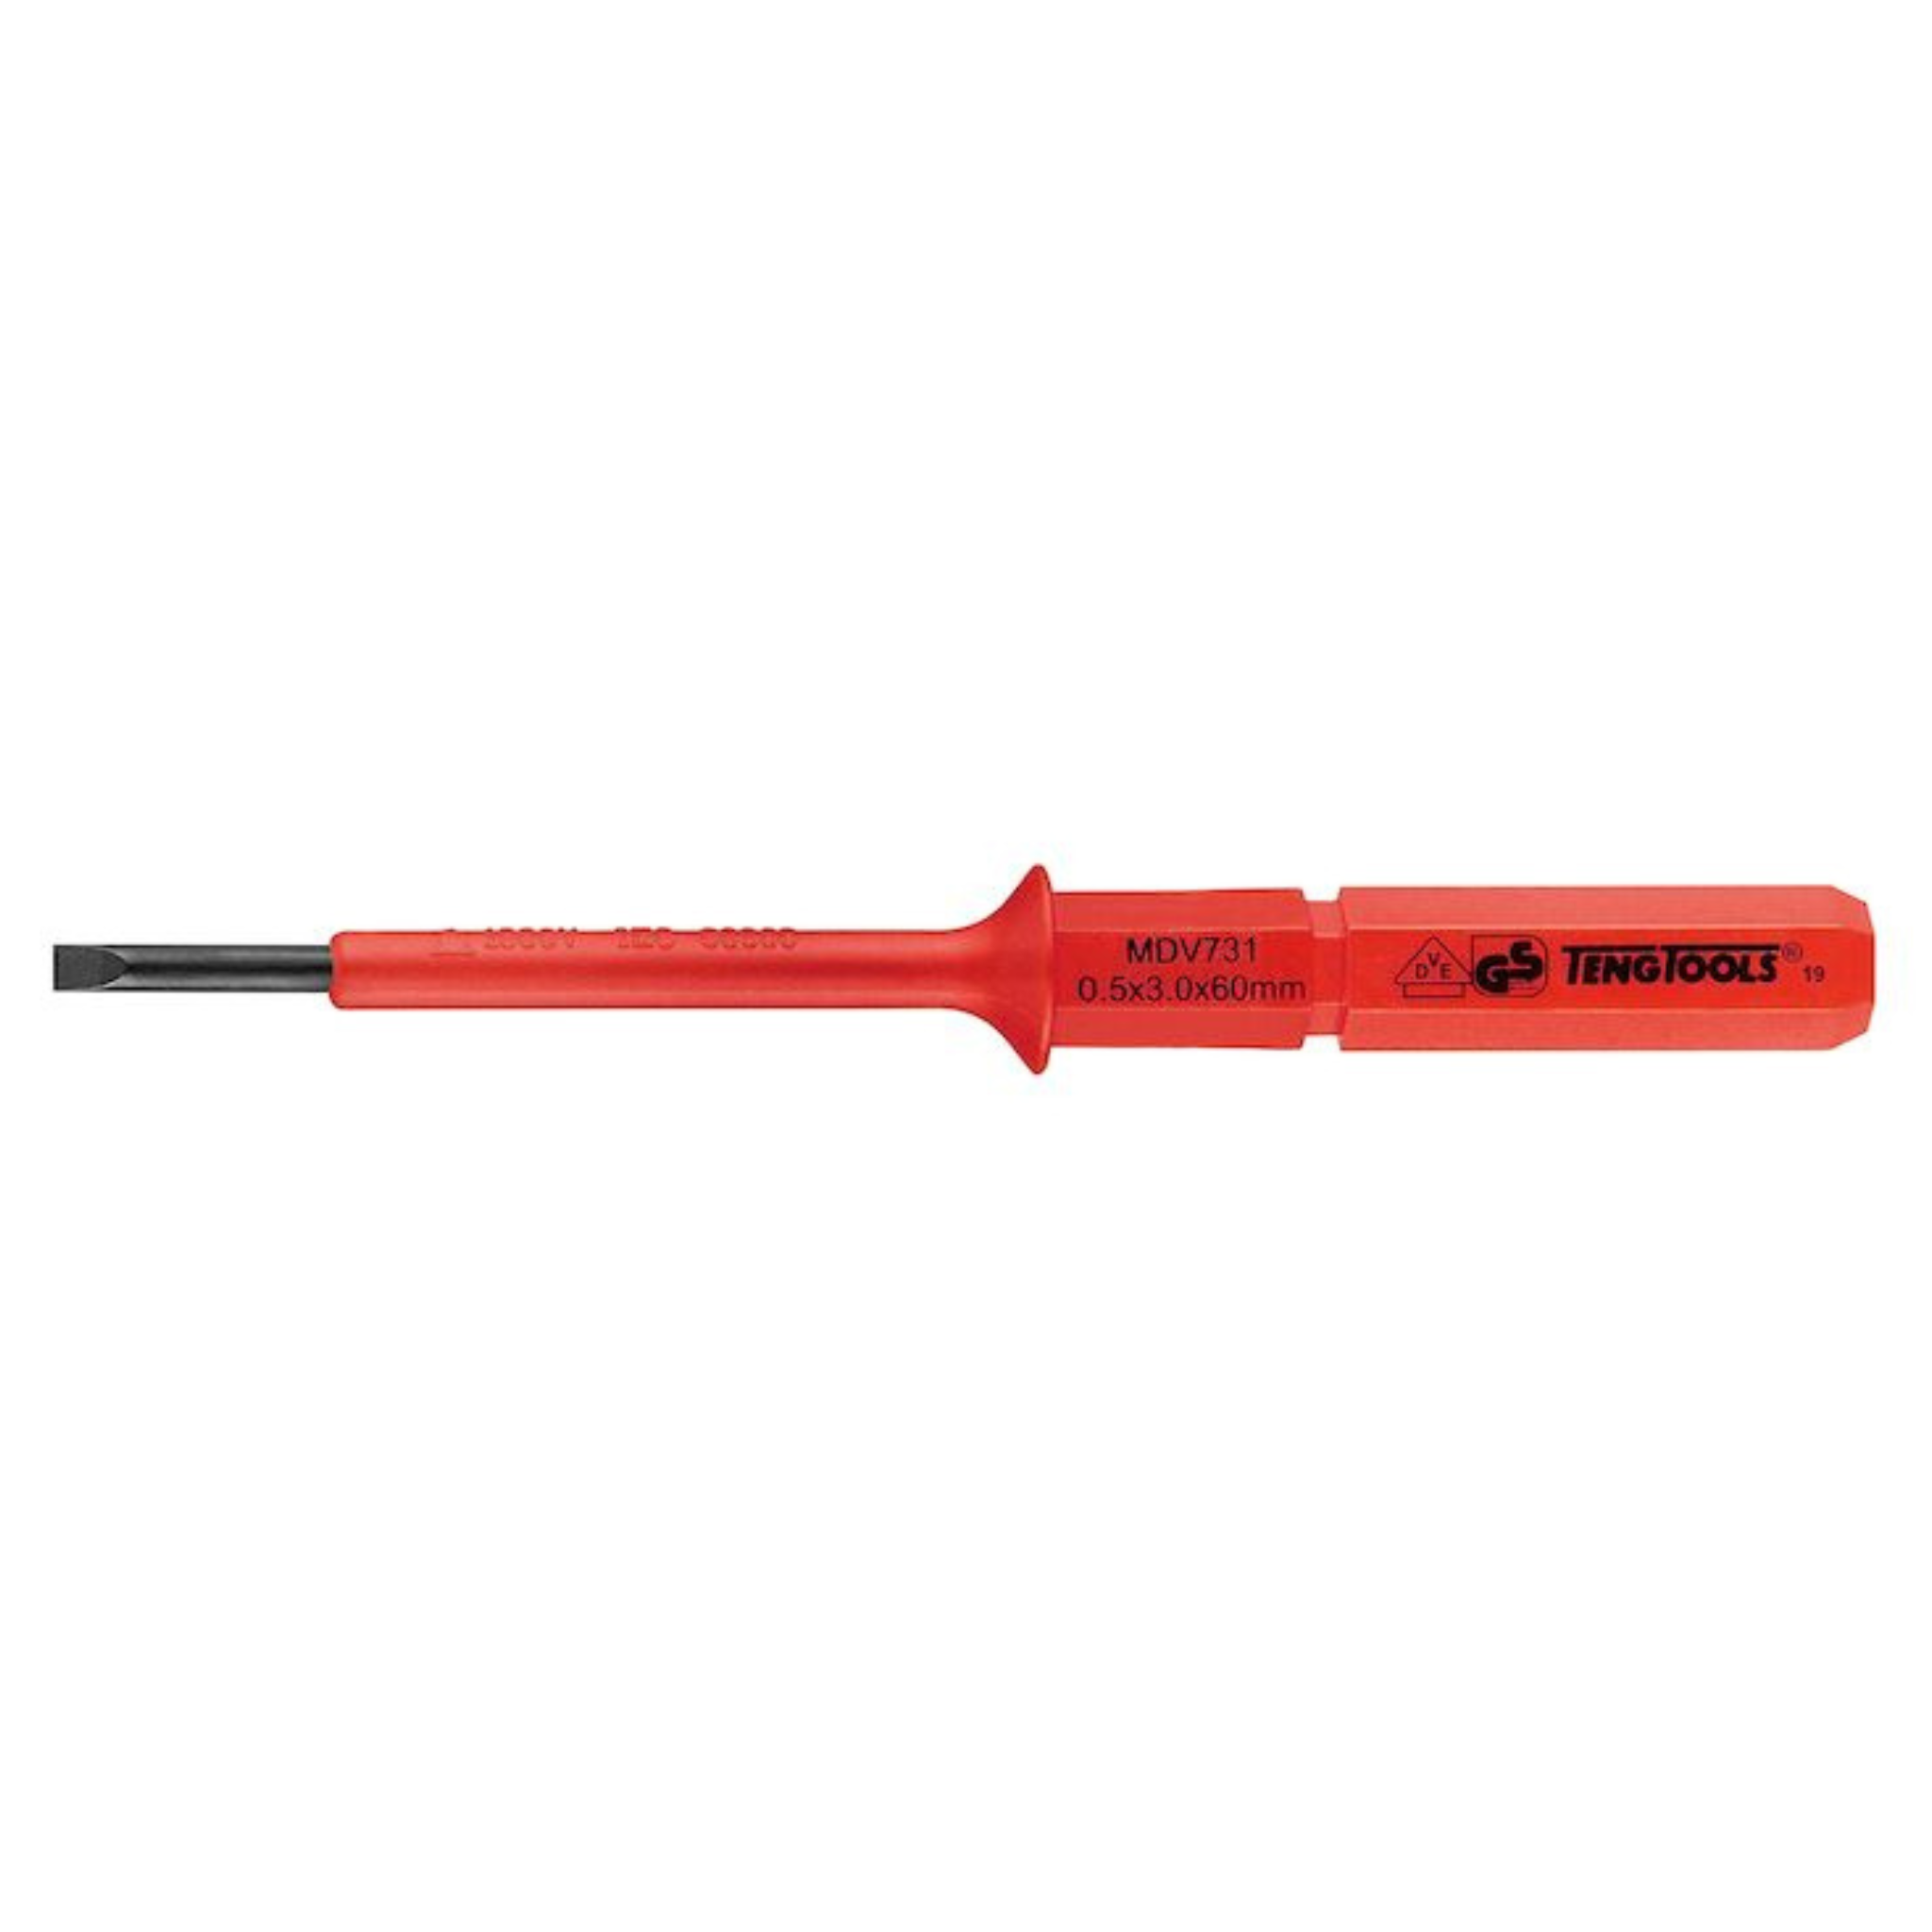 Teng Tools 1000 Volt Insulated Interchangeable Screwdriver Blades - 6.5mm Slotted